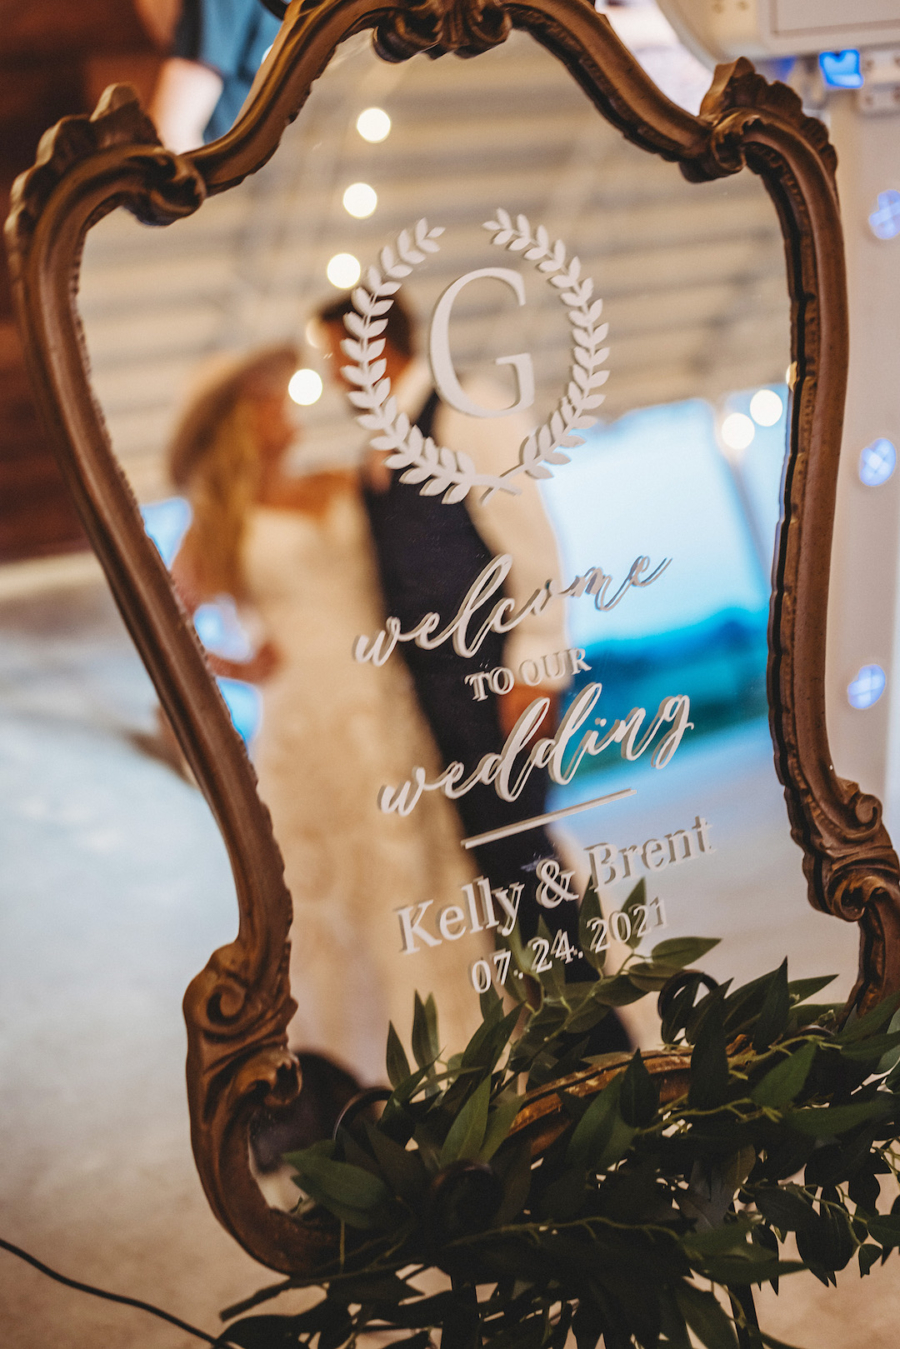 Personalized mirror wedding welcome sign